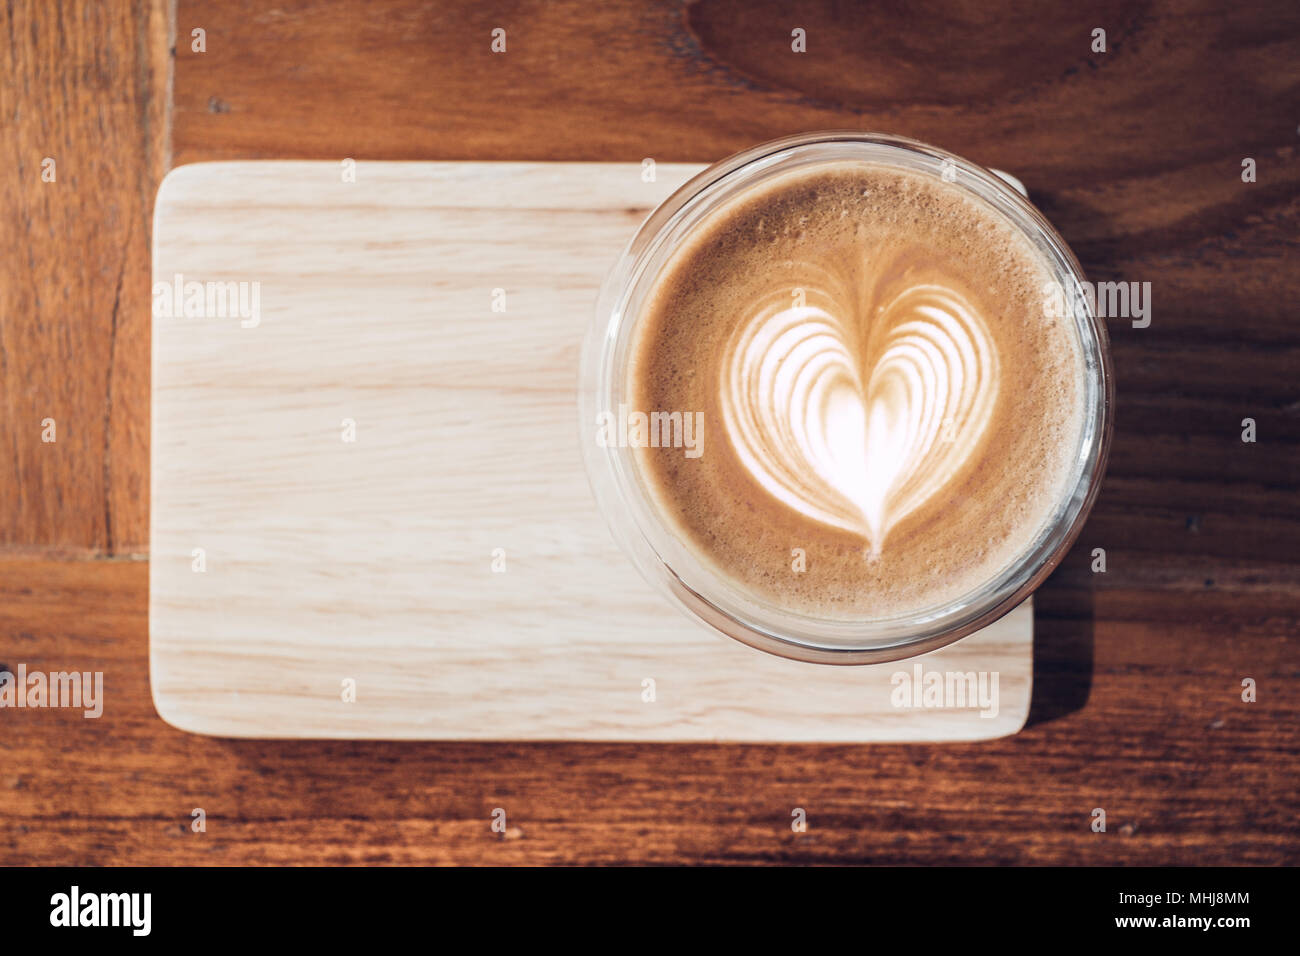 Top view of hot cappuccino coffee cup on wooden tray with heart shape latte art on wood table at cafe,food and drink Stock Photo